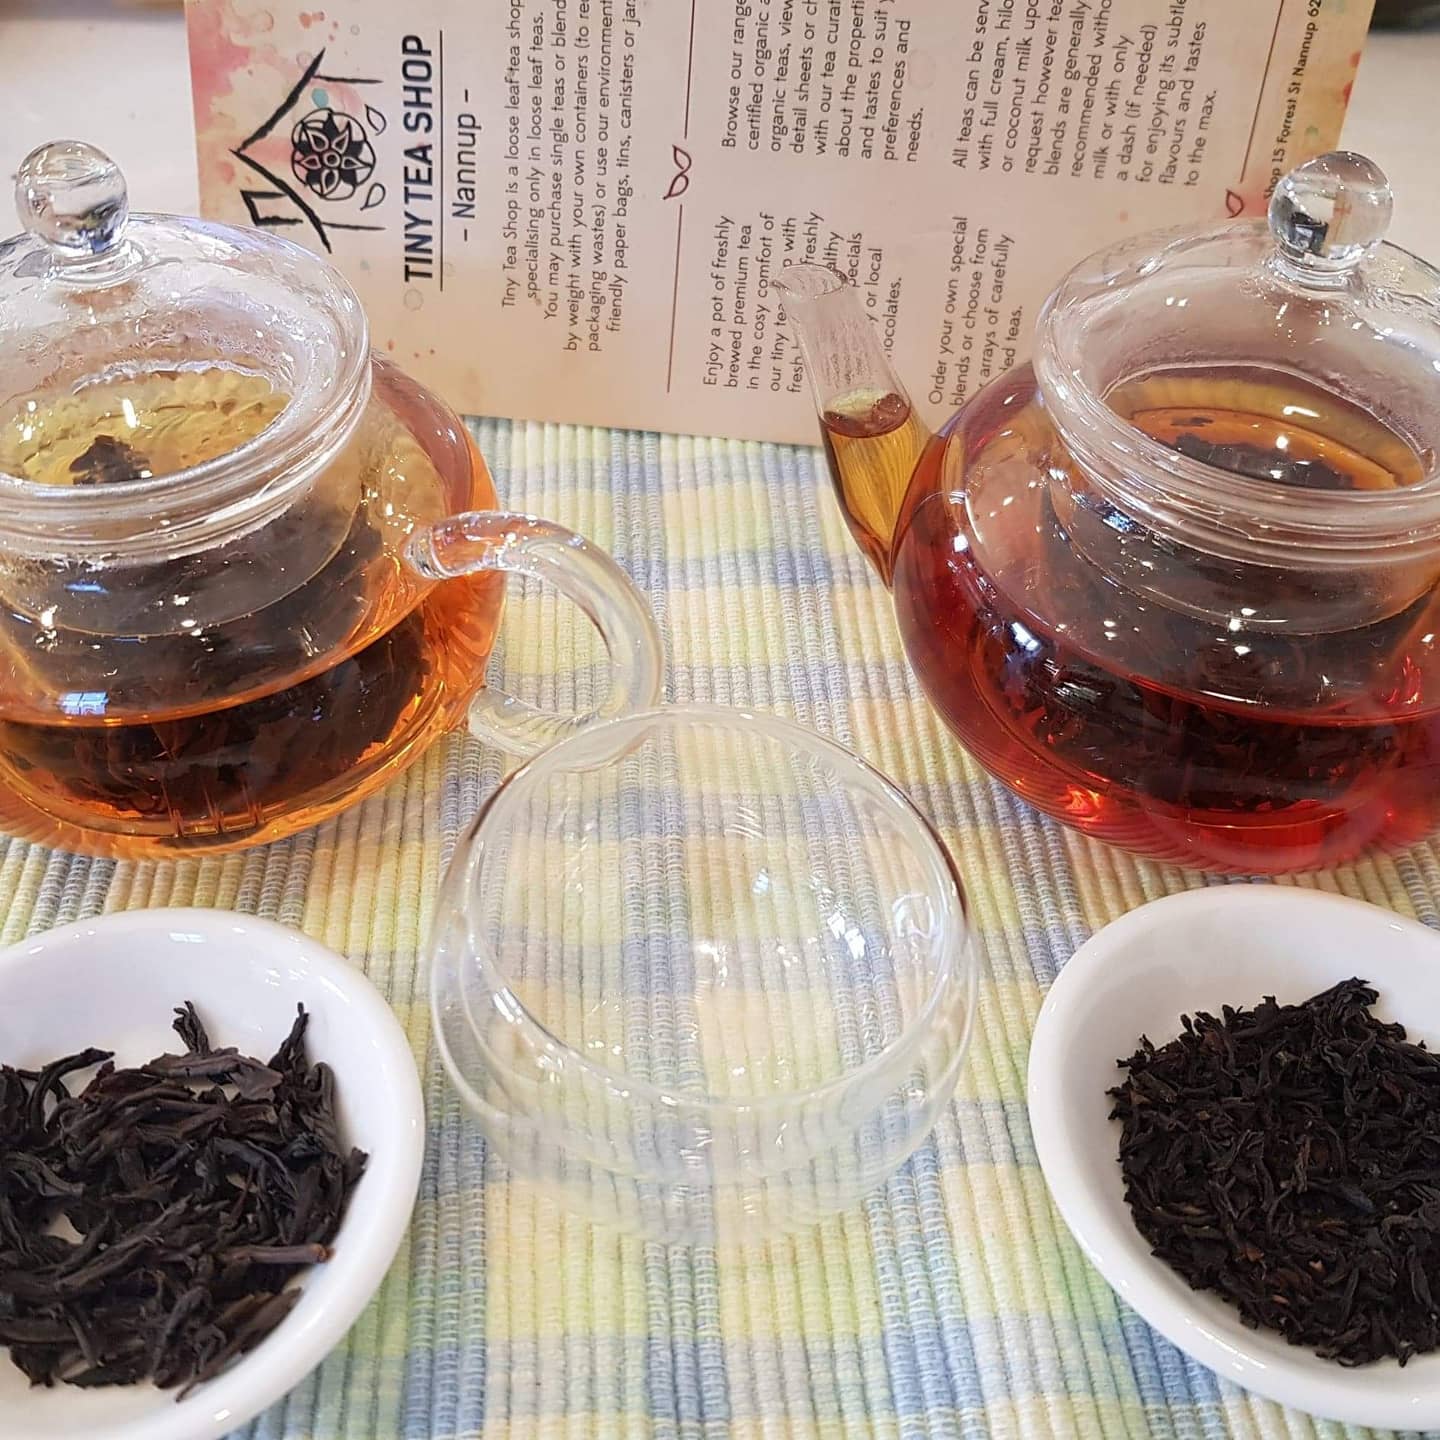 Are you a Black Tea lover?